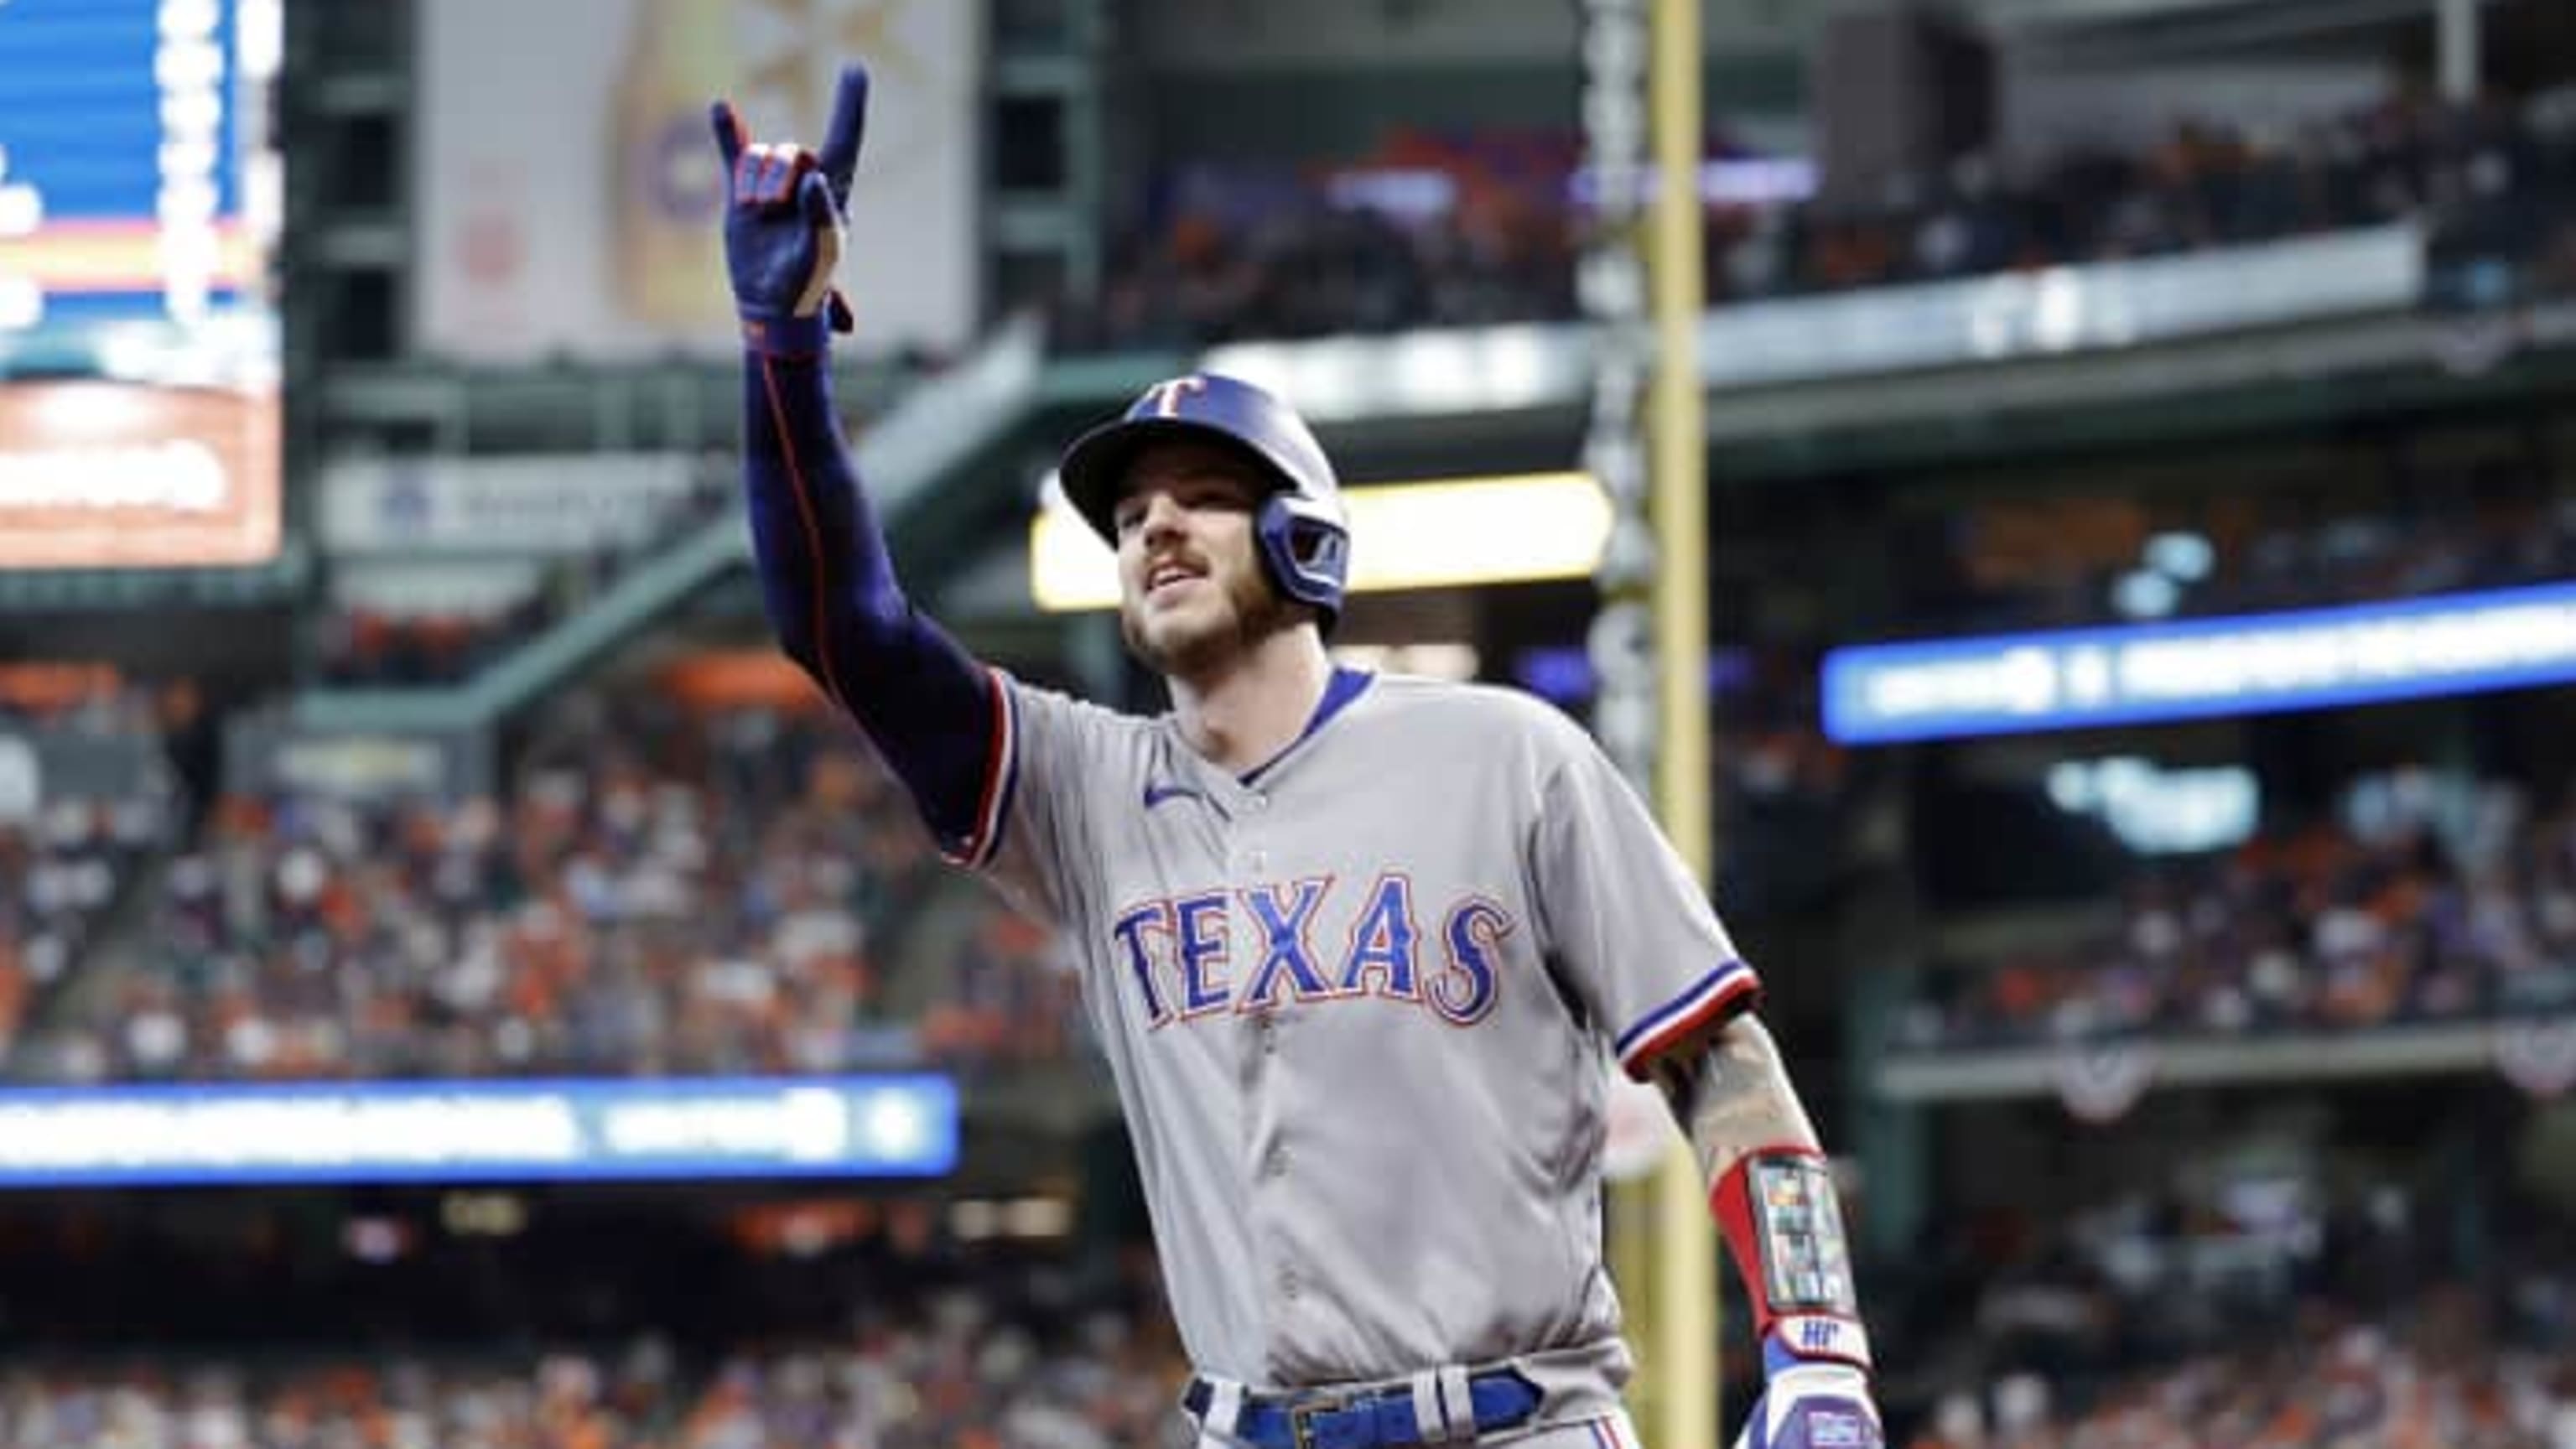 Astros vs. Rangers: ALCS matchups, including lineups and pitchers